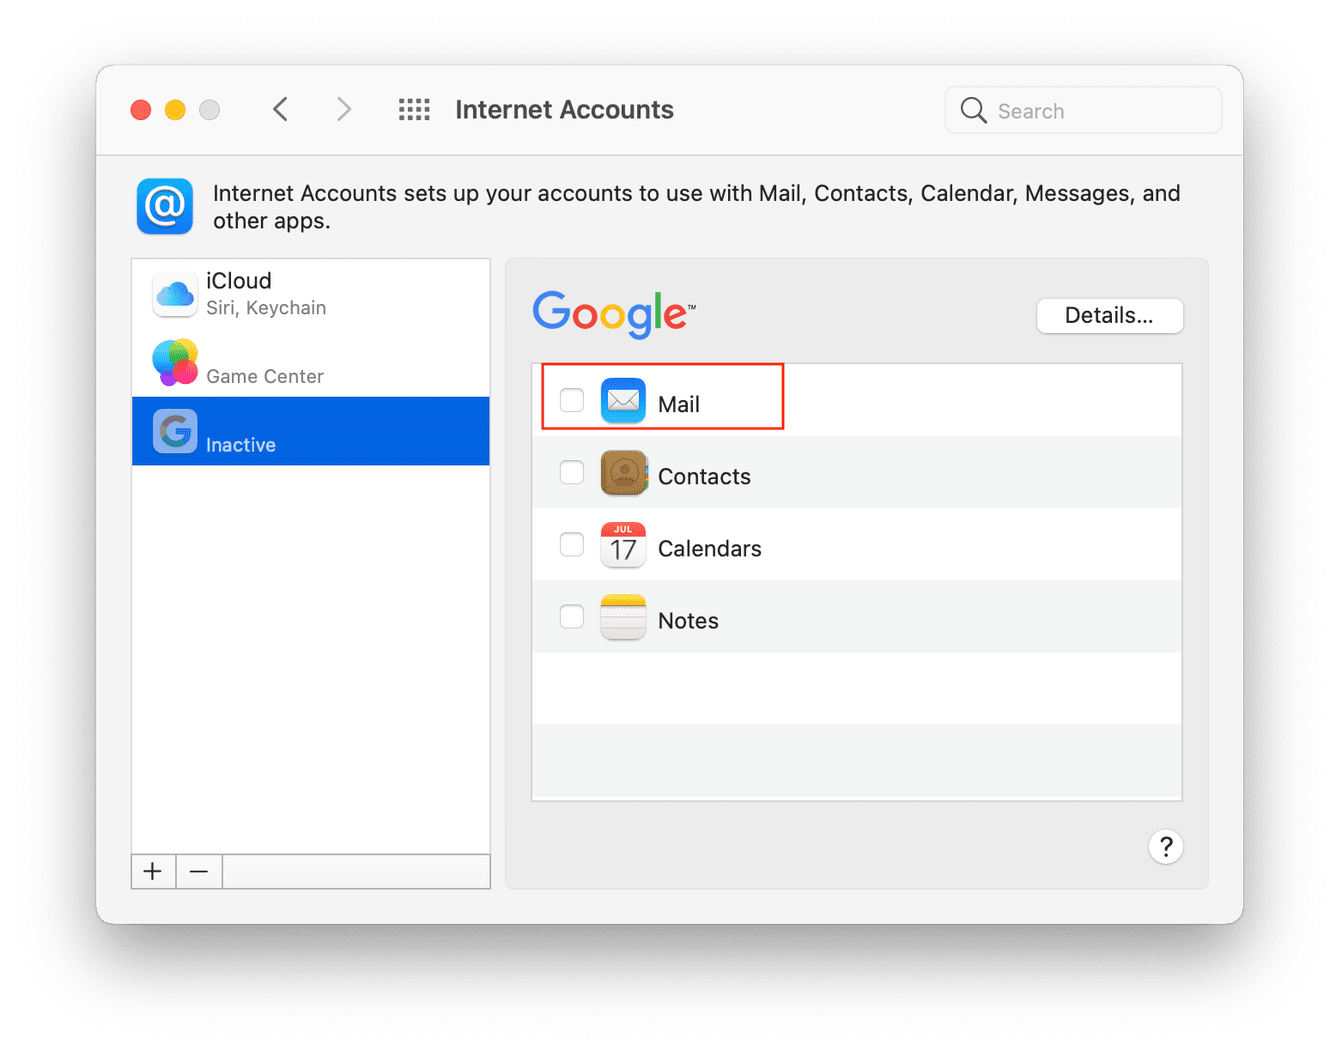 How to disable Mail accounts